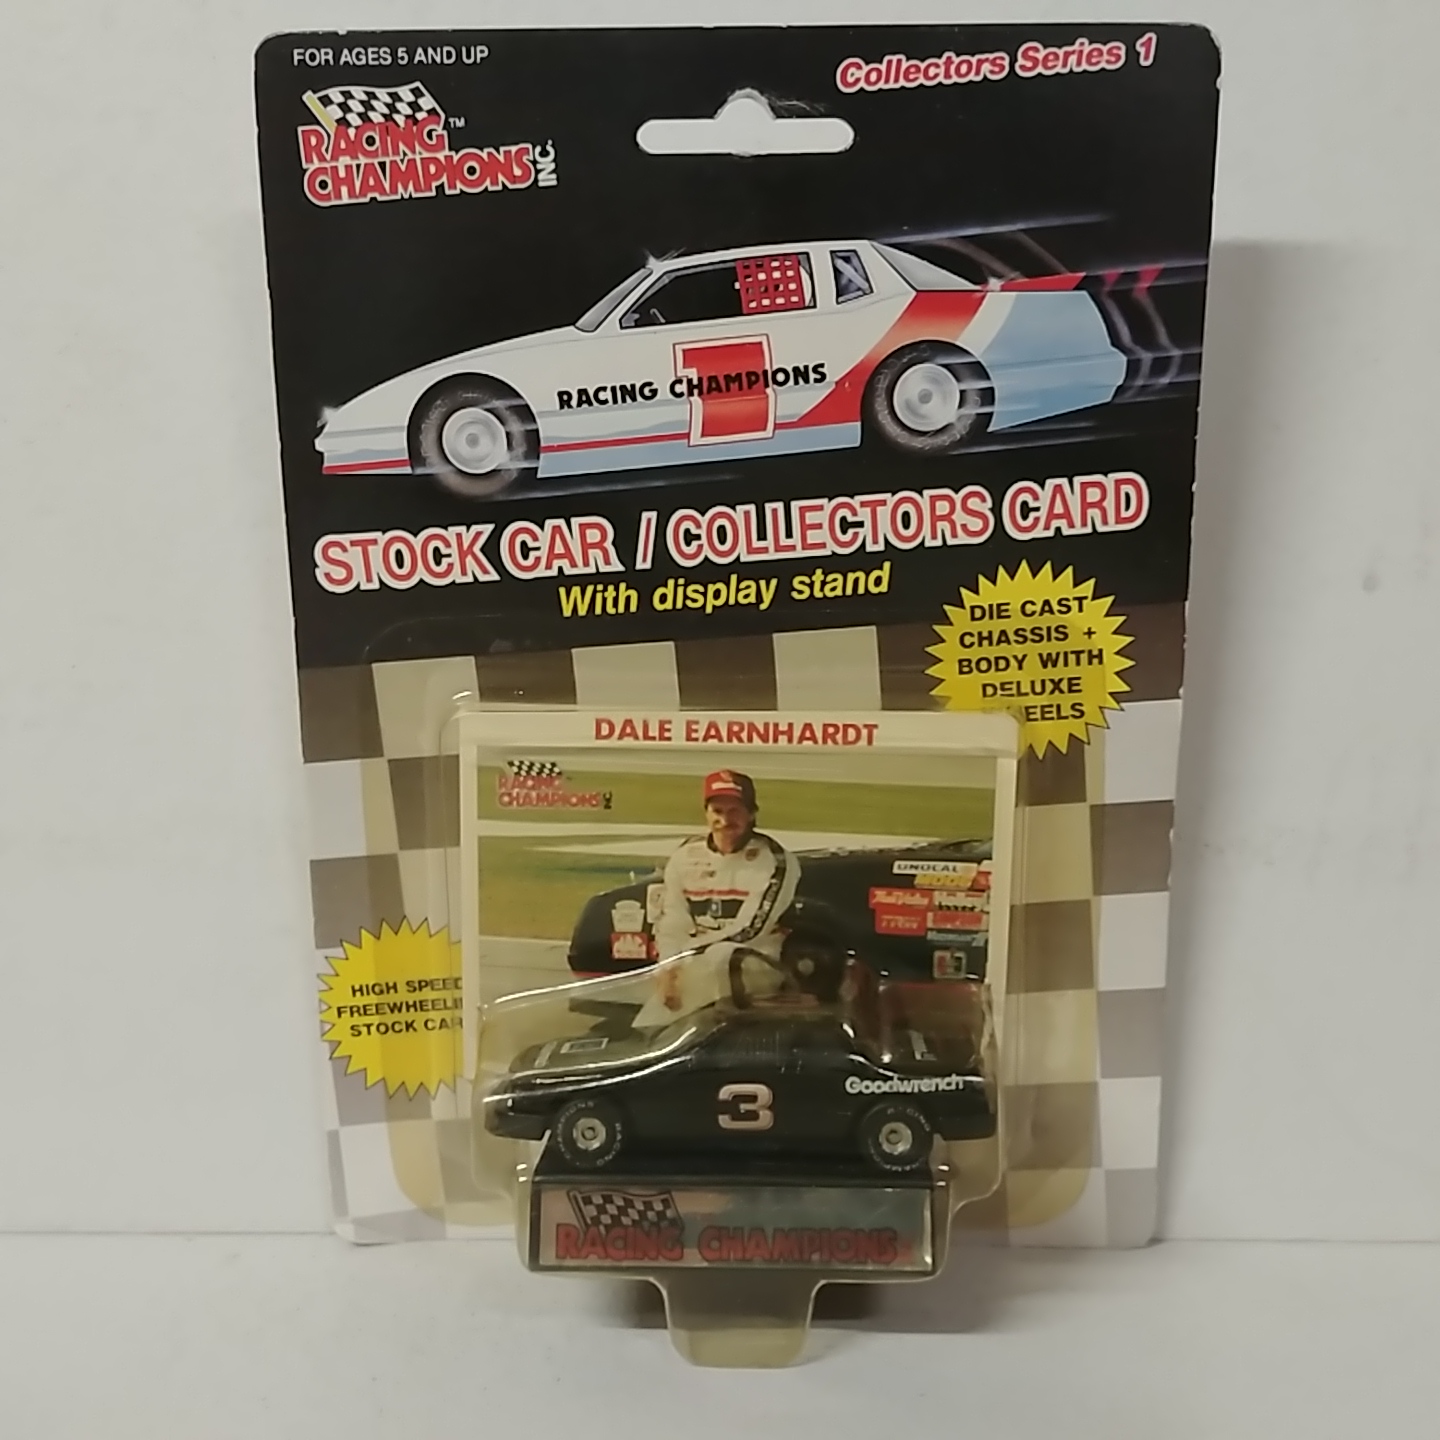 1991 Dale Earnhardt 1/64th Goodwrench "Test" car